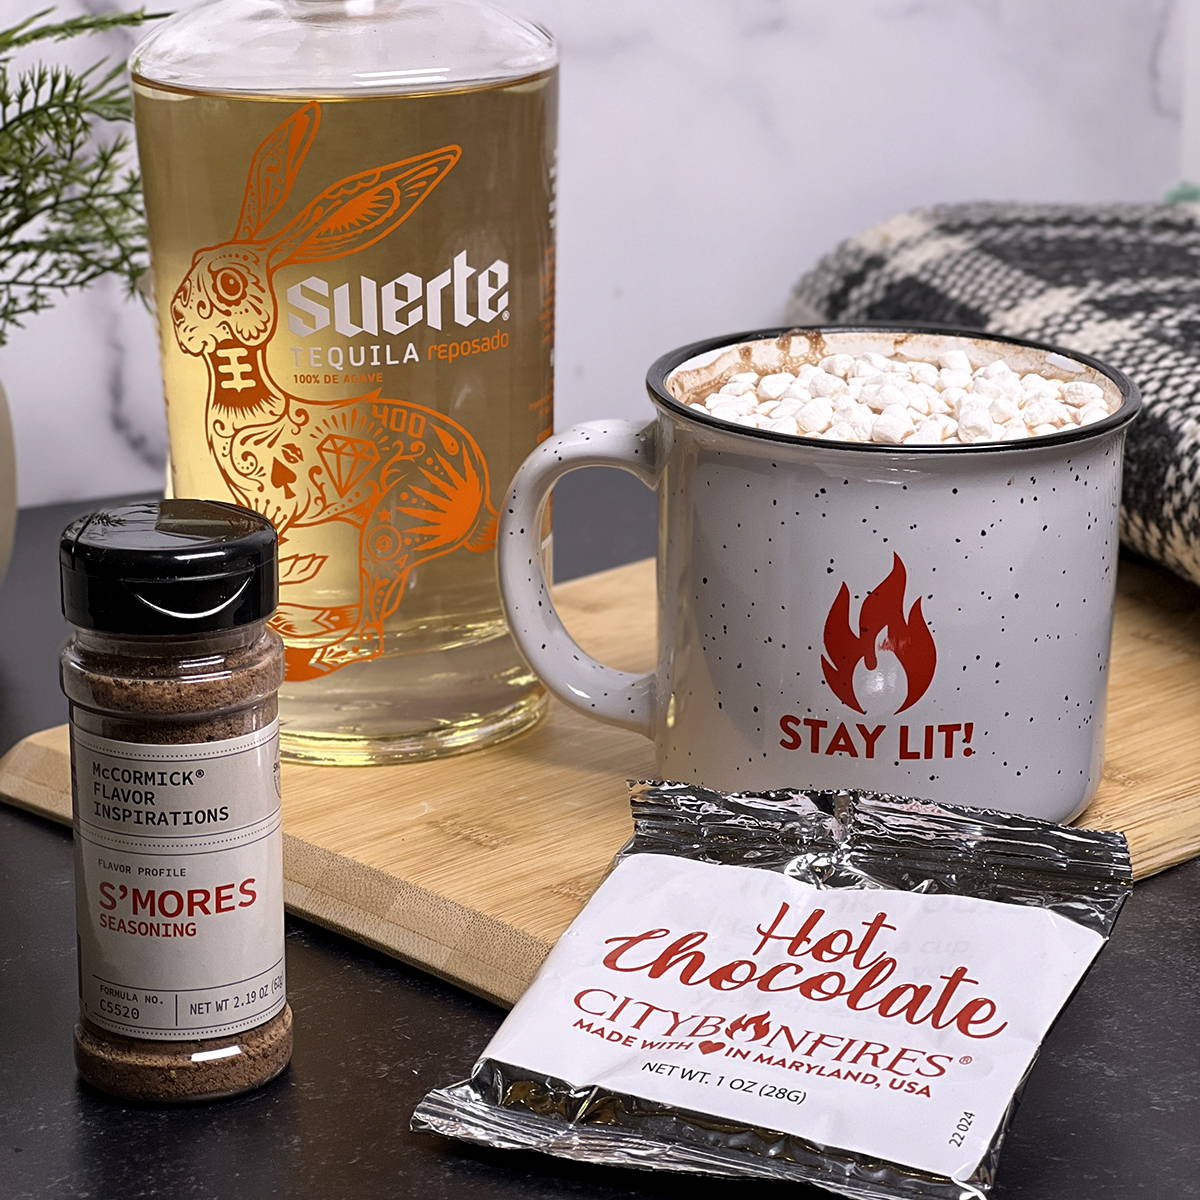 Mexican S’mores Flavored Hot Chocolate with Tequila Recipe - City Bonfires